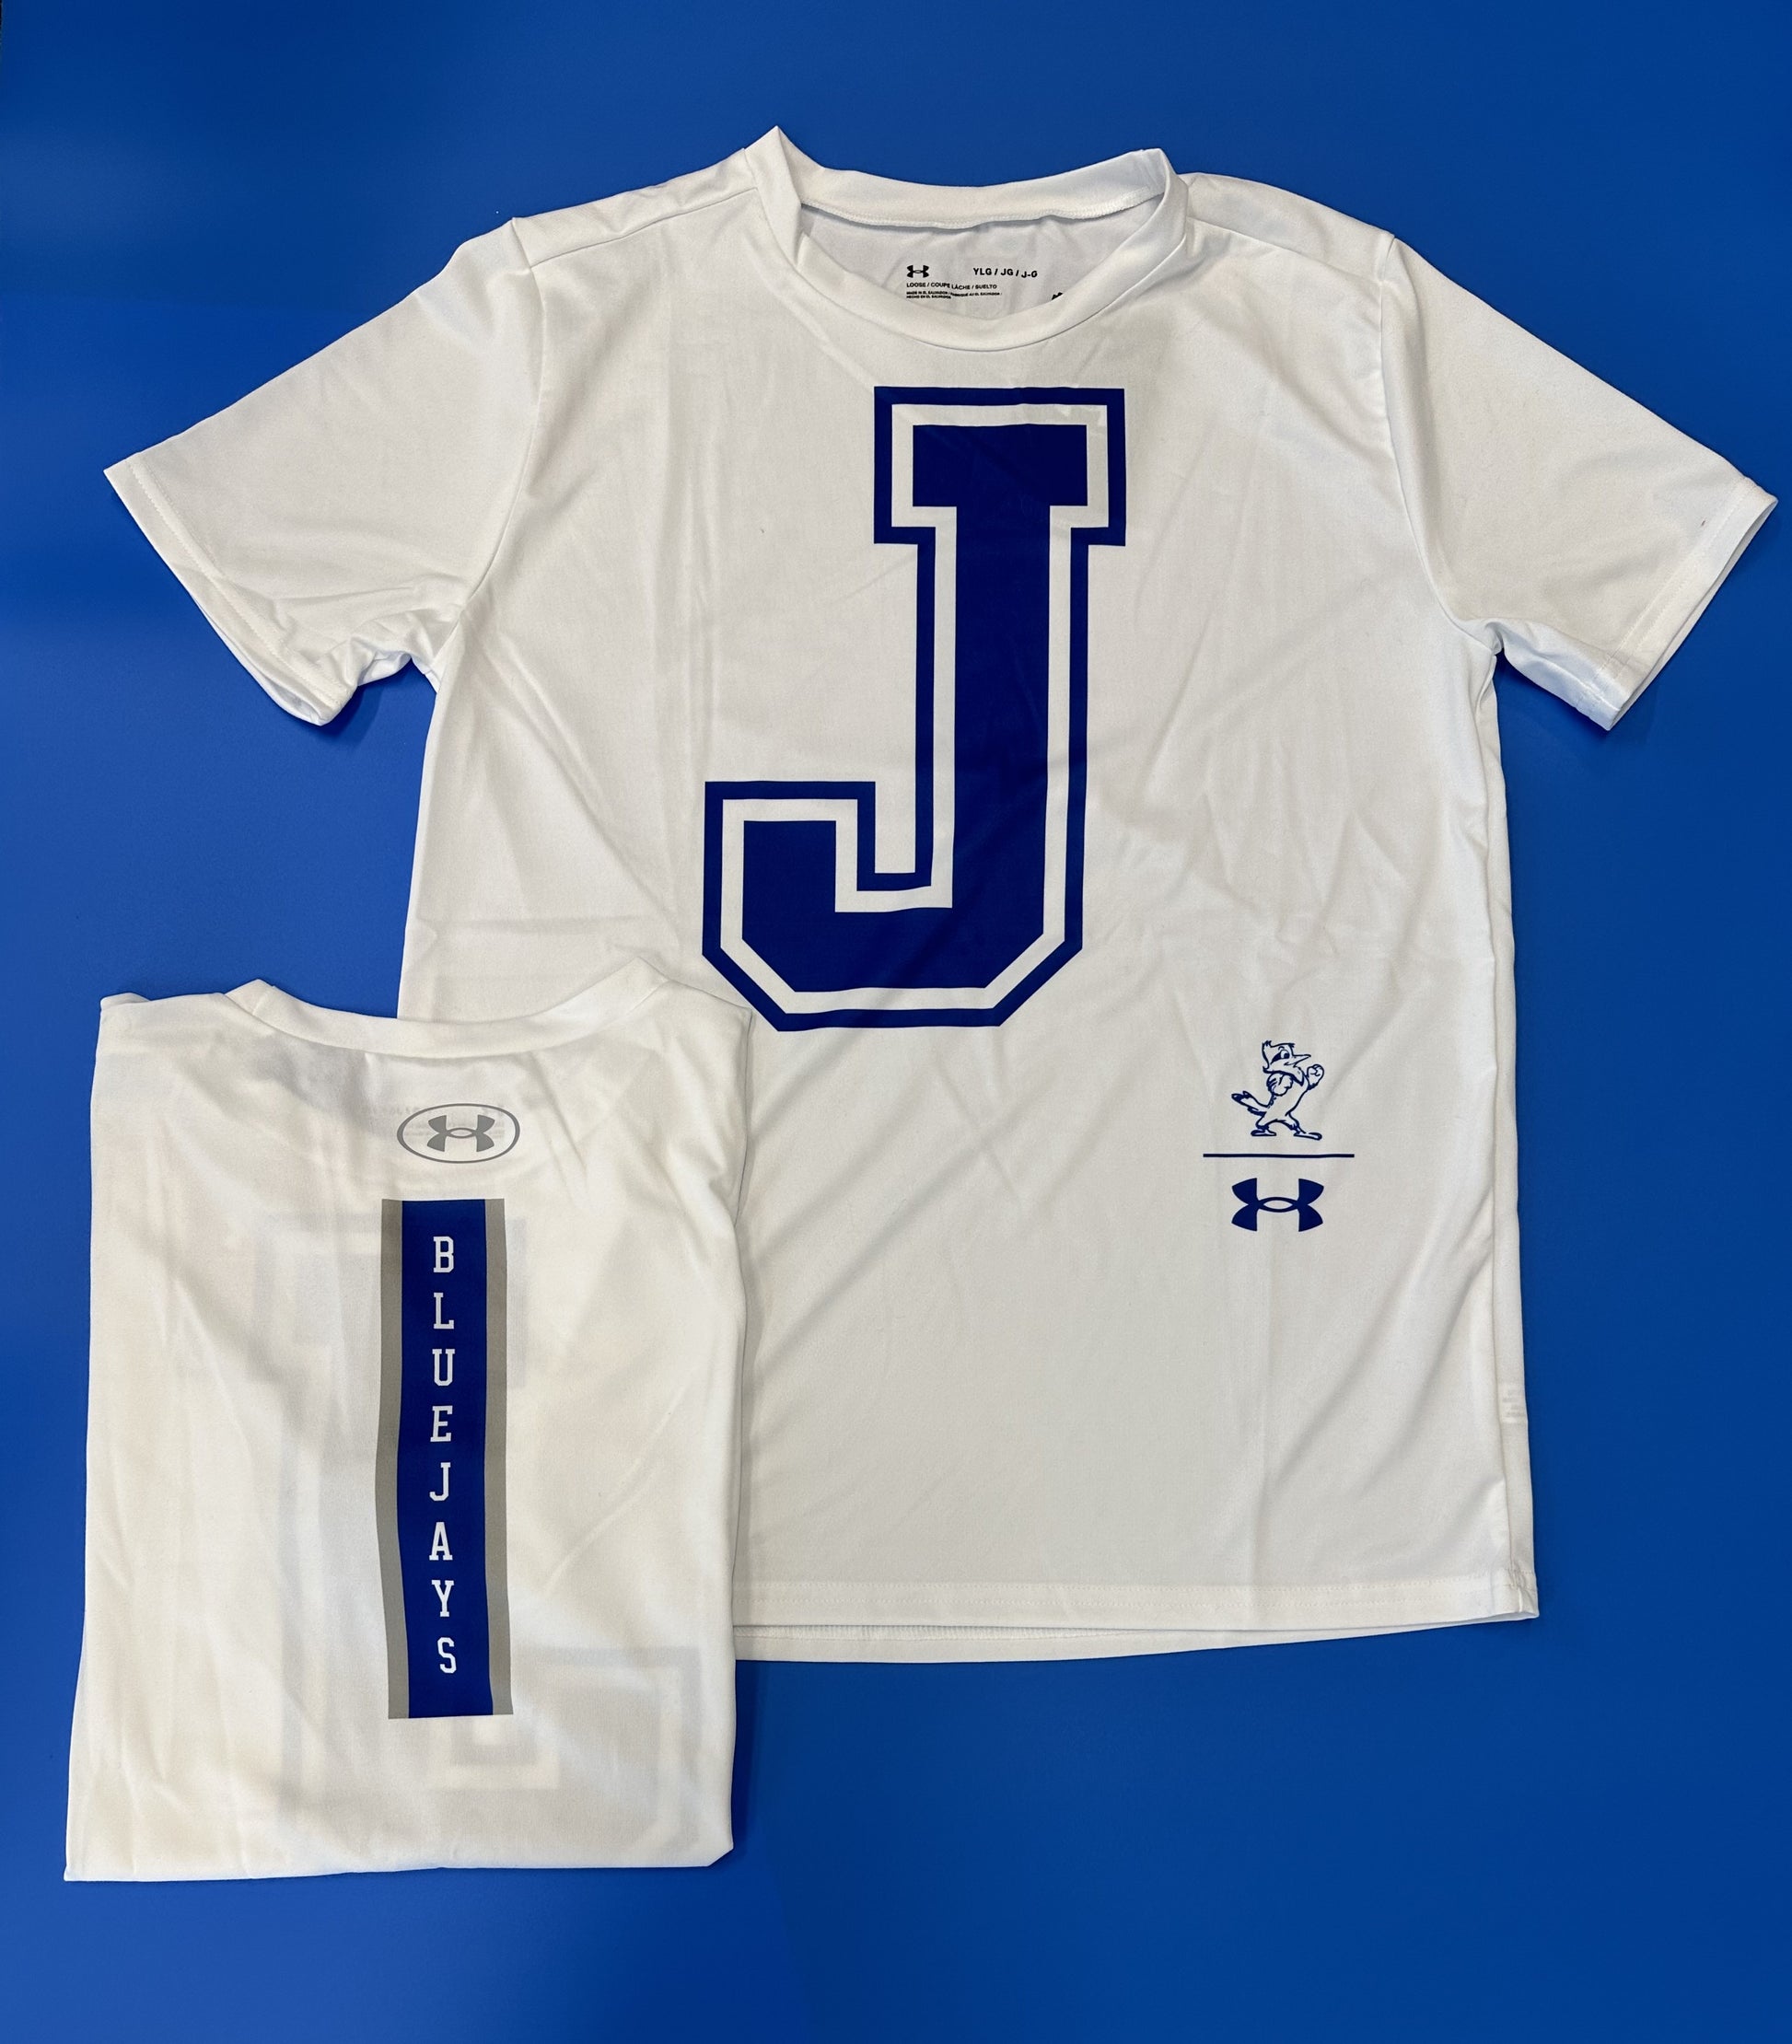 Under Armour.  100% Polyester  Performance Fabric.  Big 'J' on the front w/BLUE JAYS down center back.